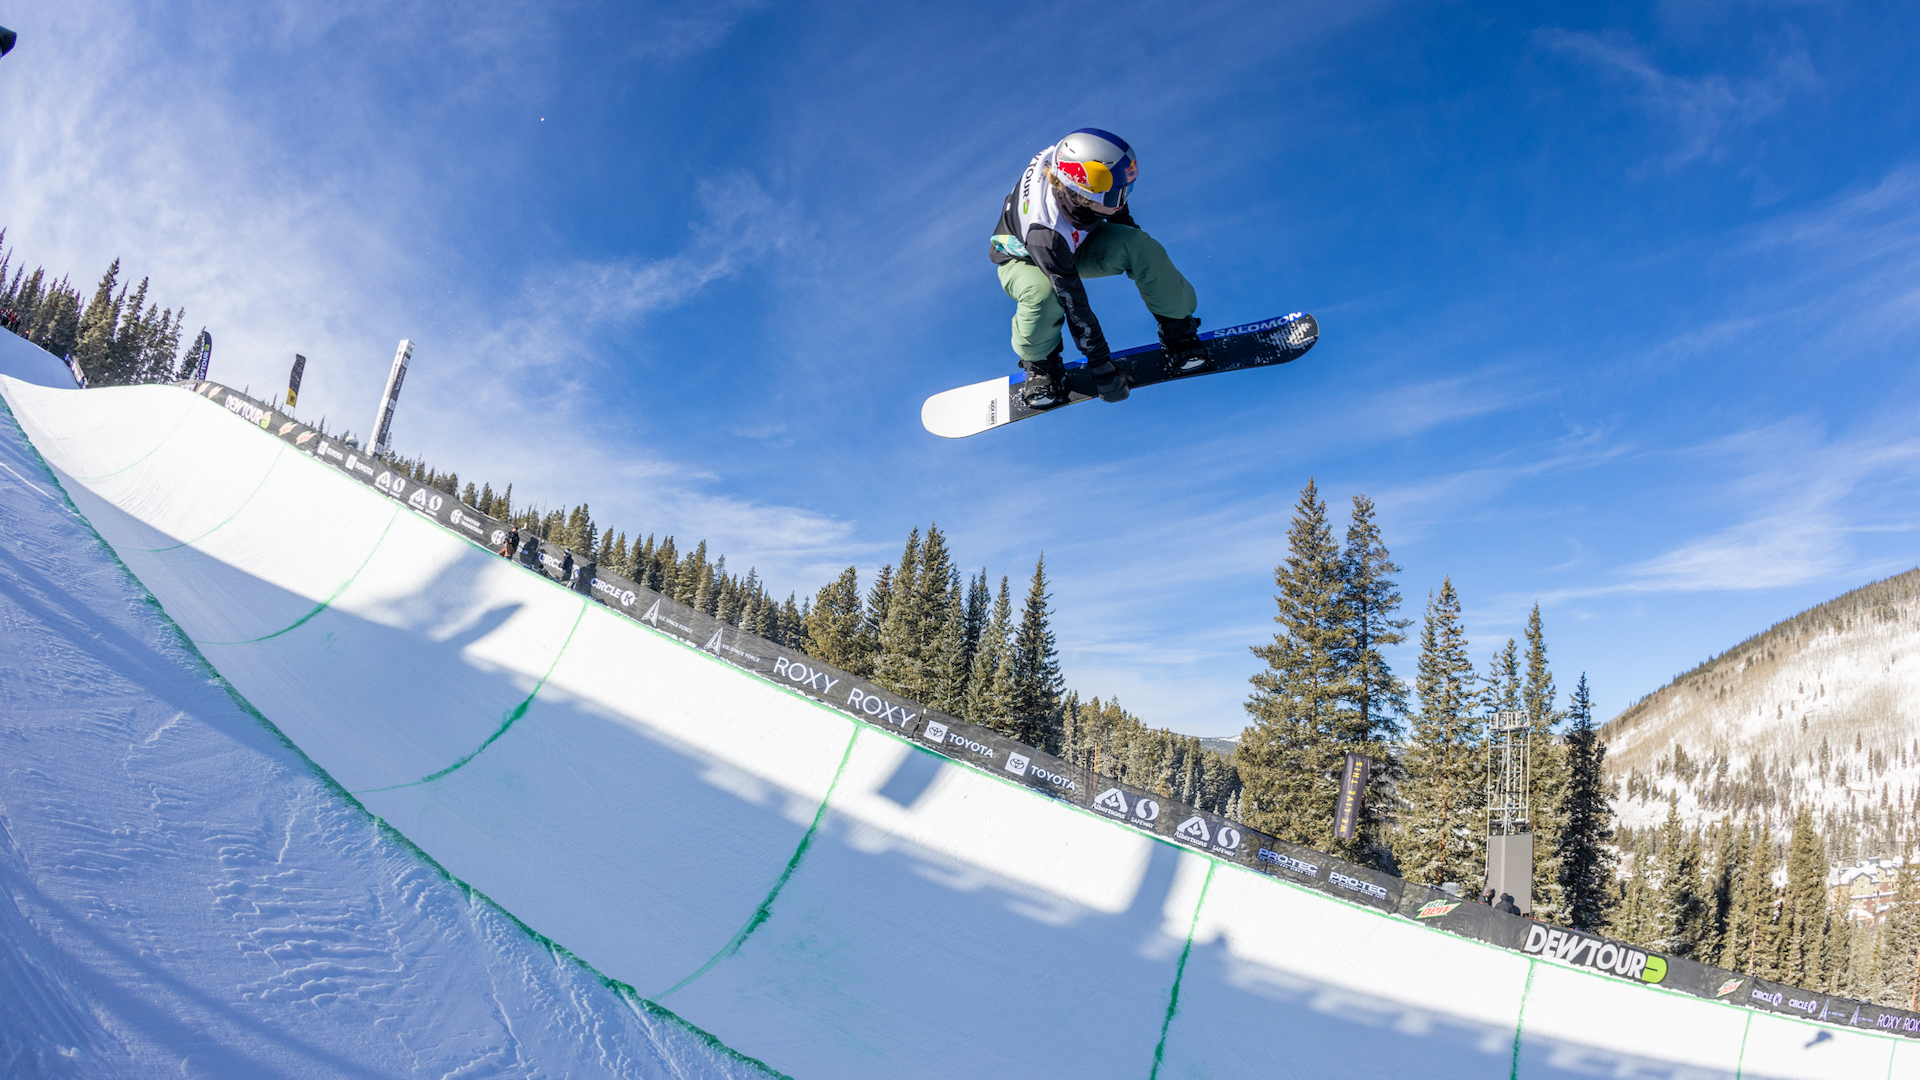 Maddie Mastro airs out of the halfpipe. 